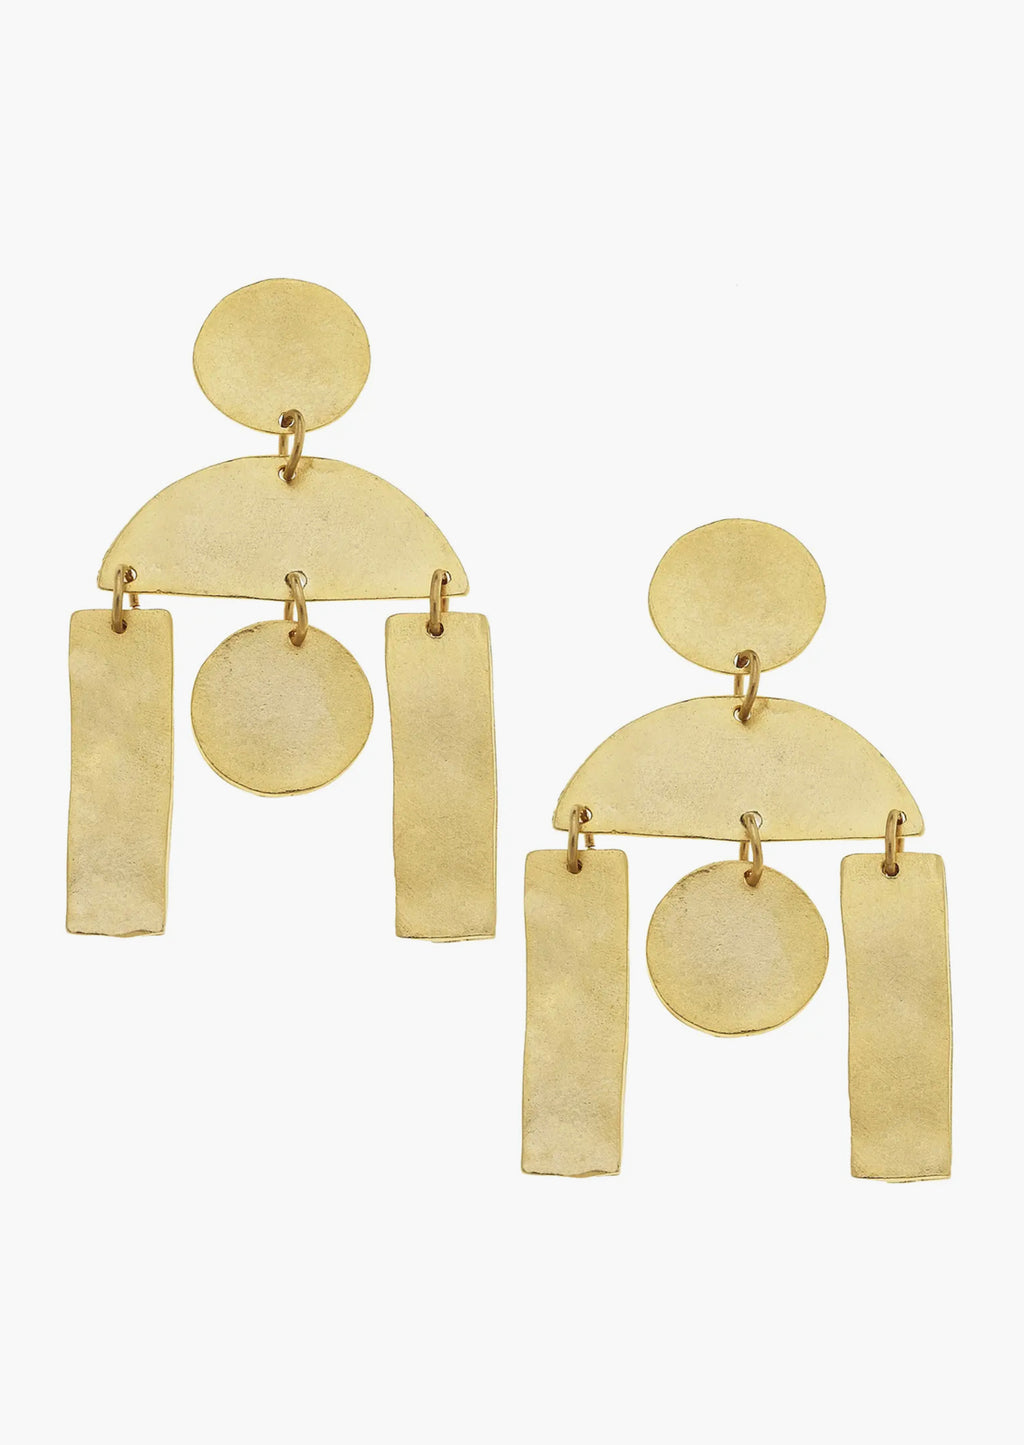 2: A pair of gold earrings with geometric chandelier design.